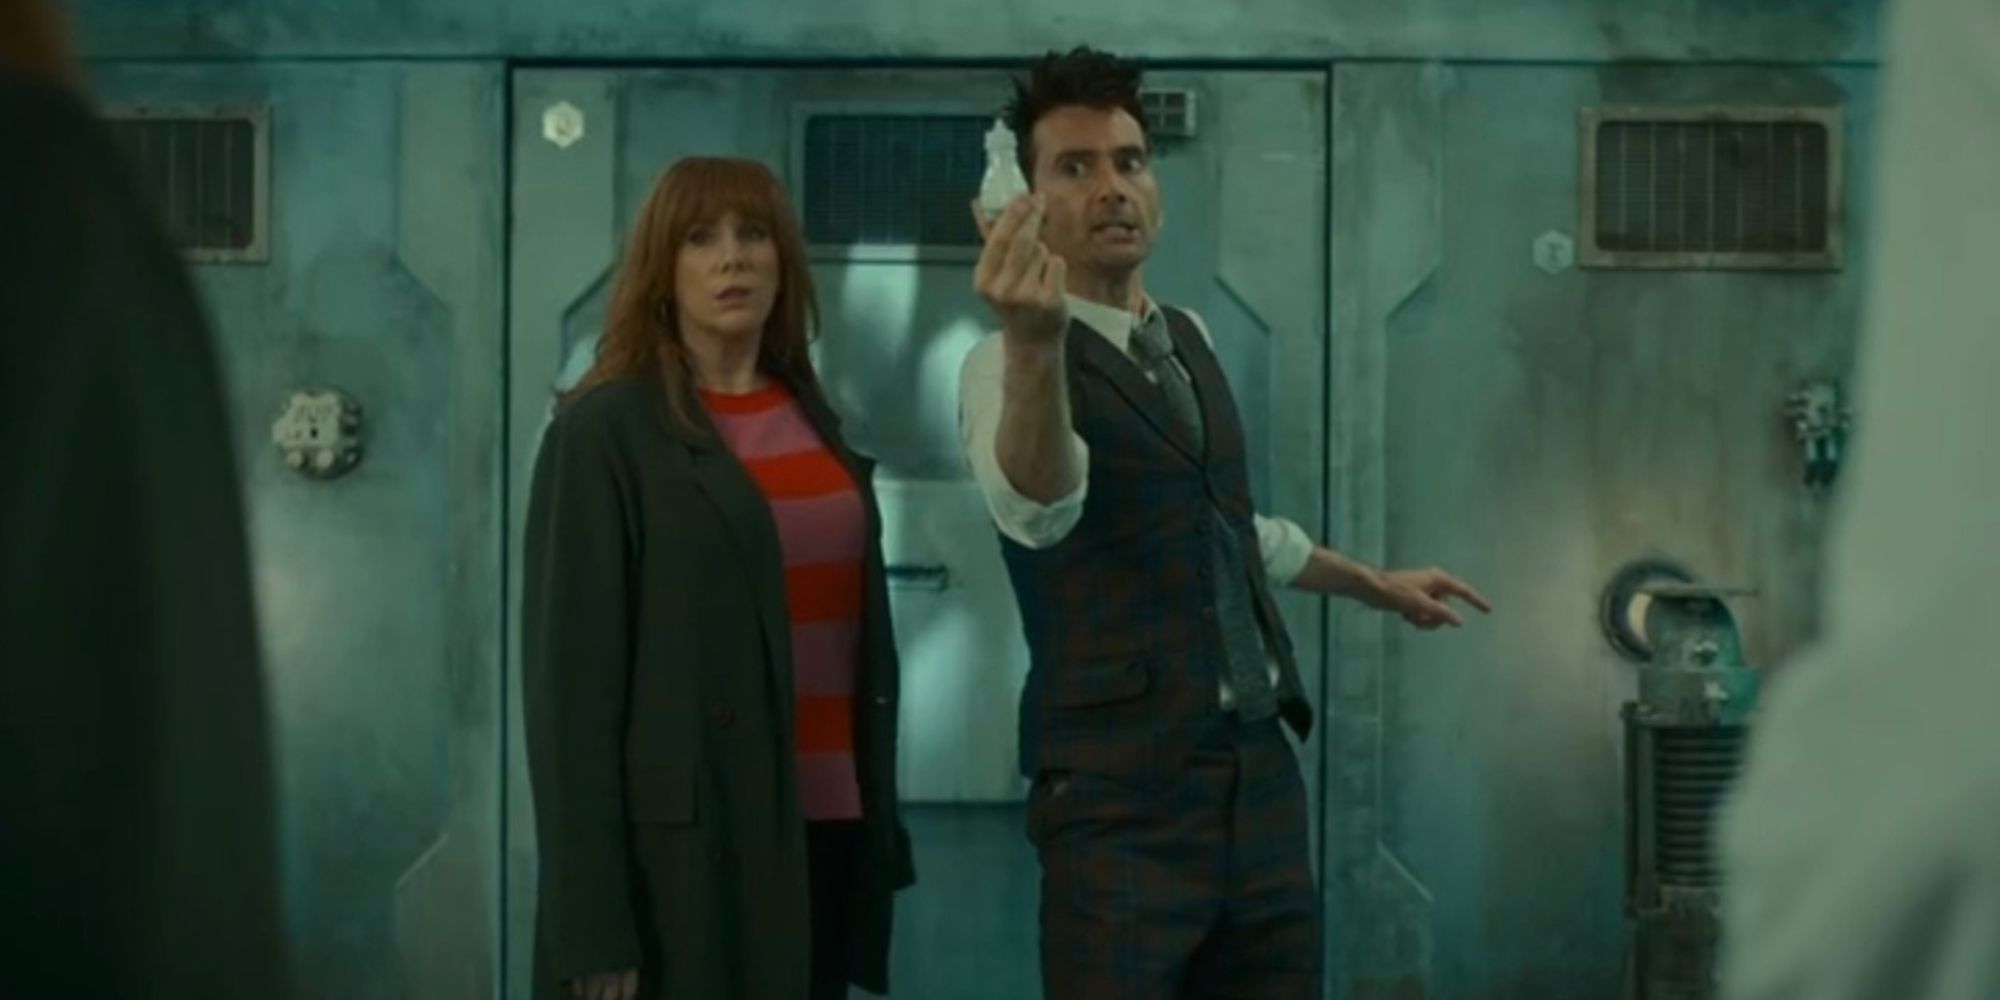 The Doctor holds a salt shaker next to Donna in the Doctor Who special 